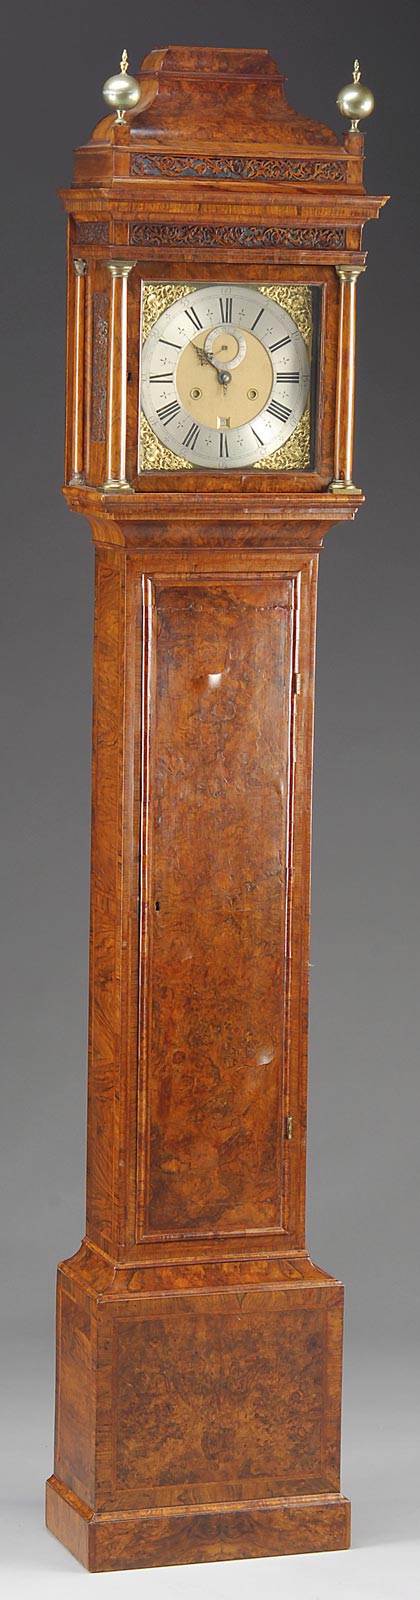 With wooden works by Daniel Quare of London, this Queen Anne tall case clock topped $80,500.  Image courtesy Julia Auctions.